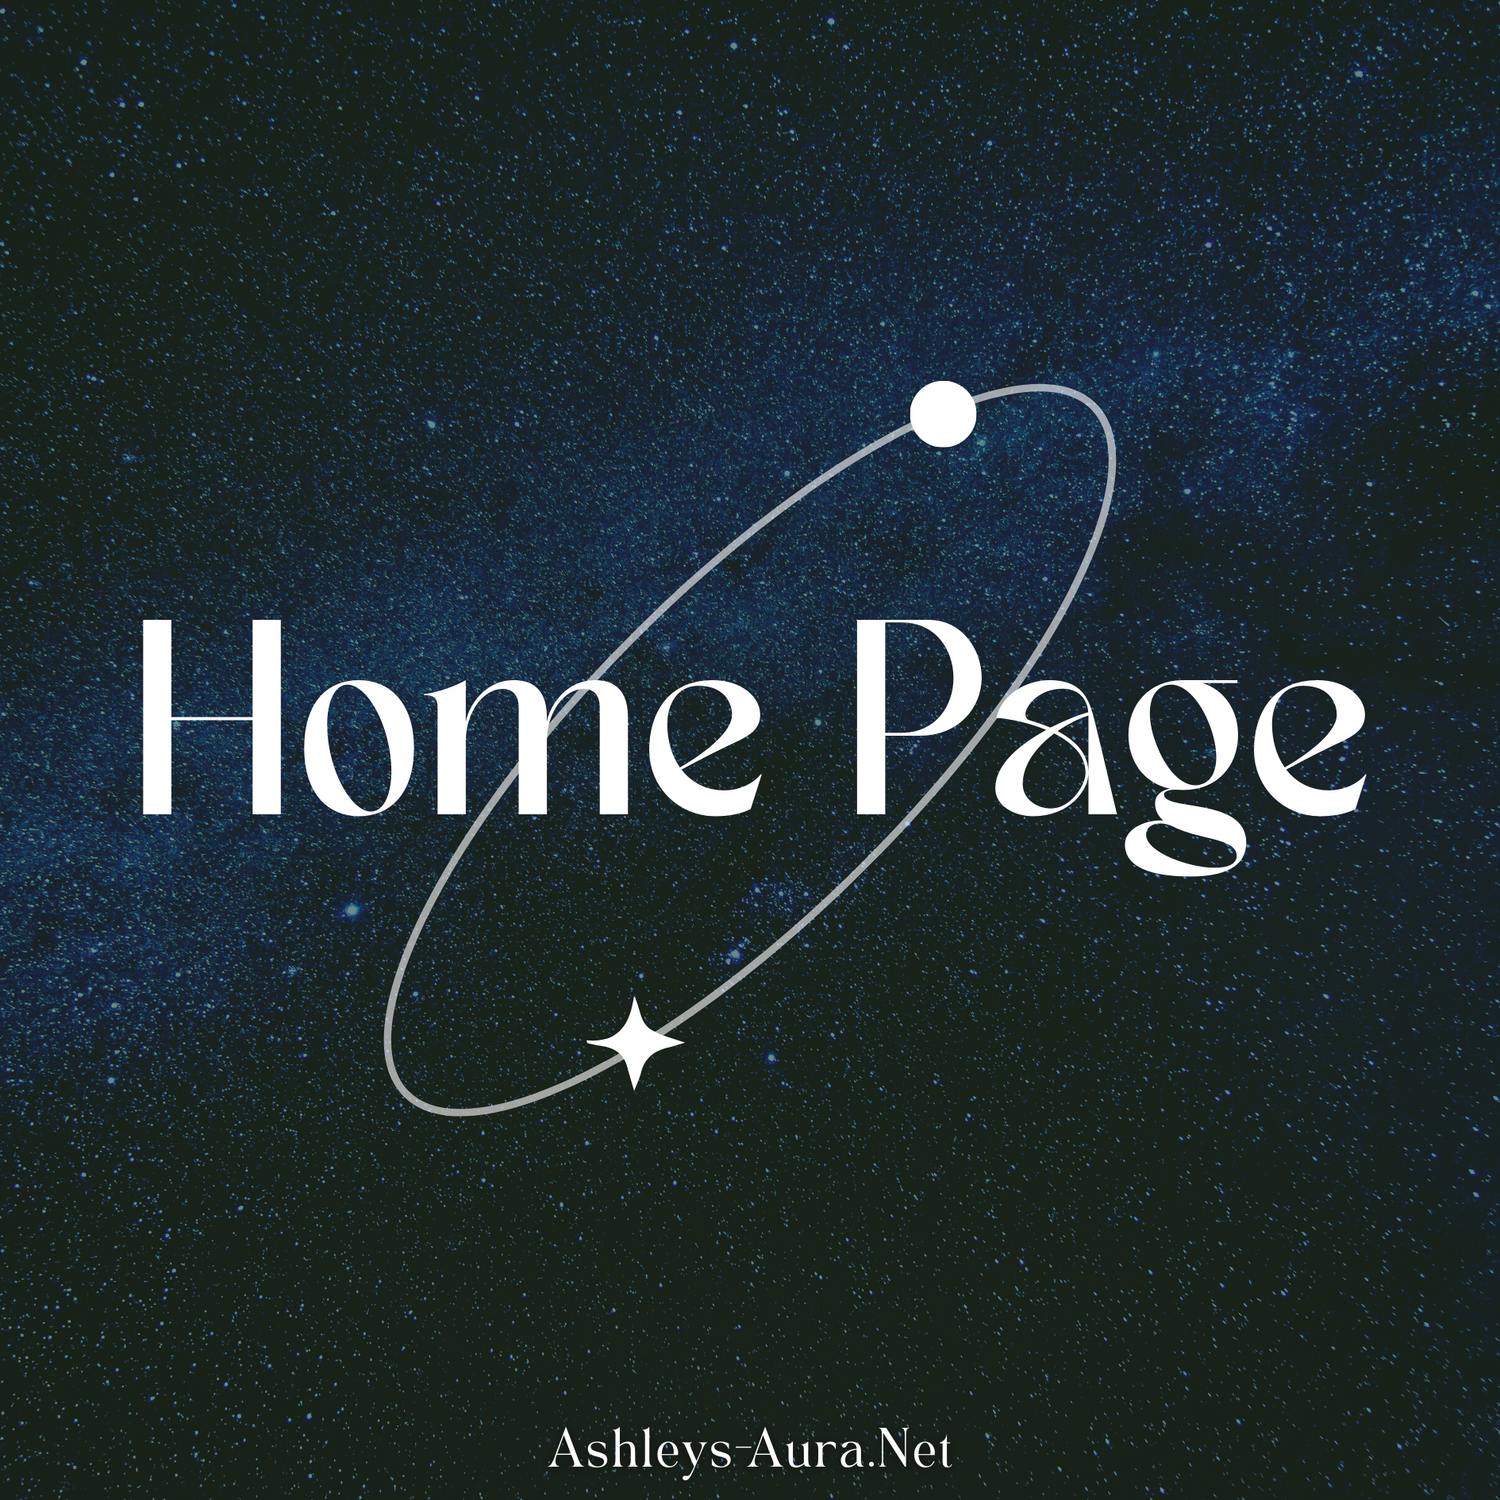 Home Page - Ashley's Aura